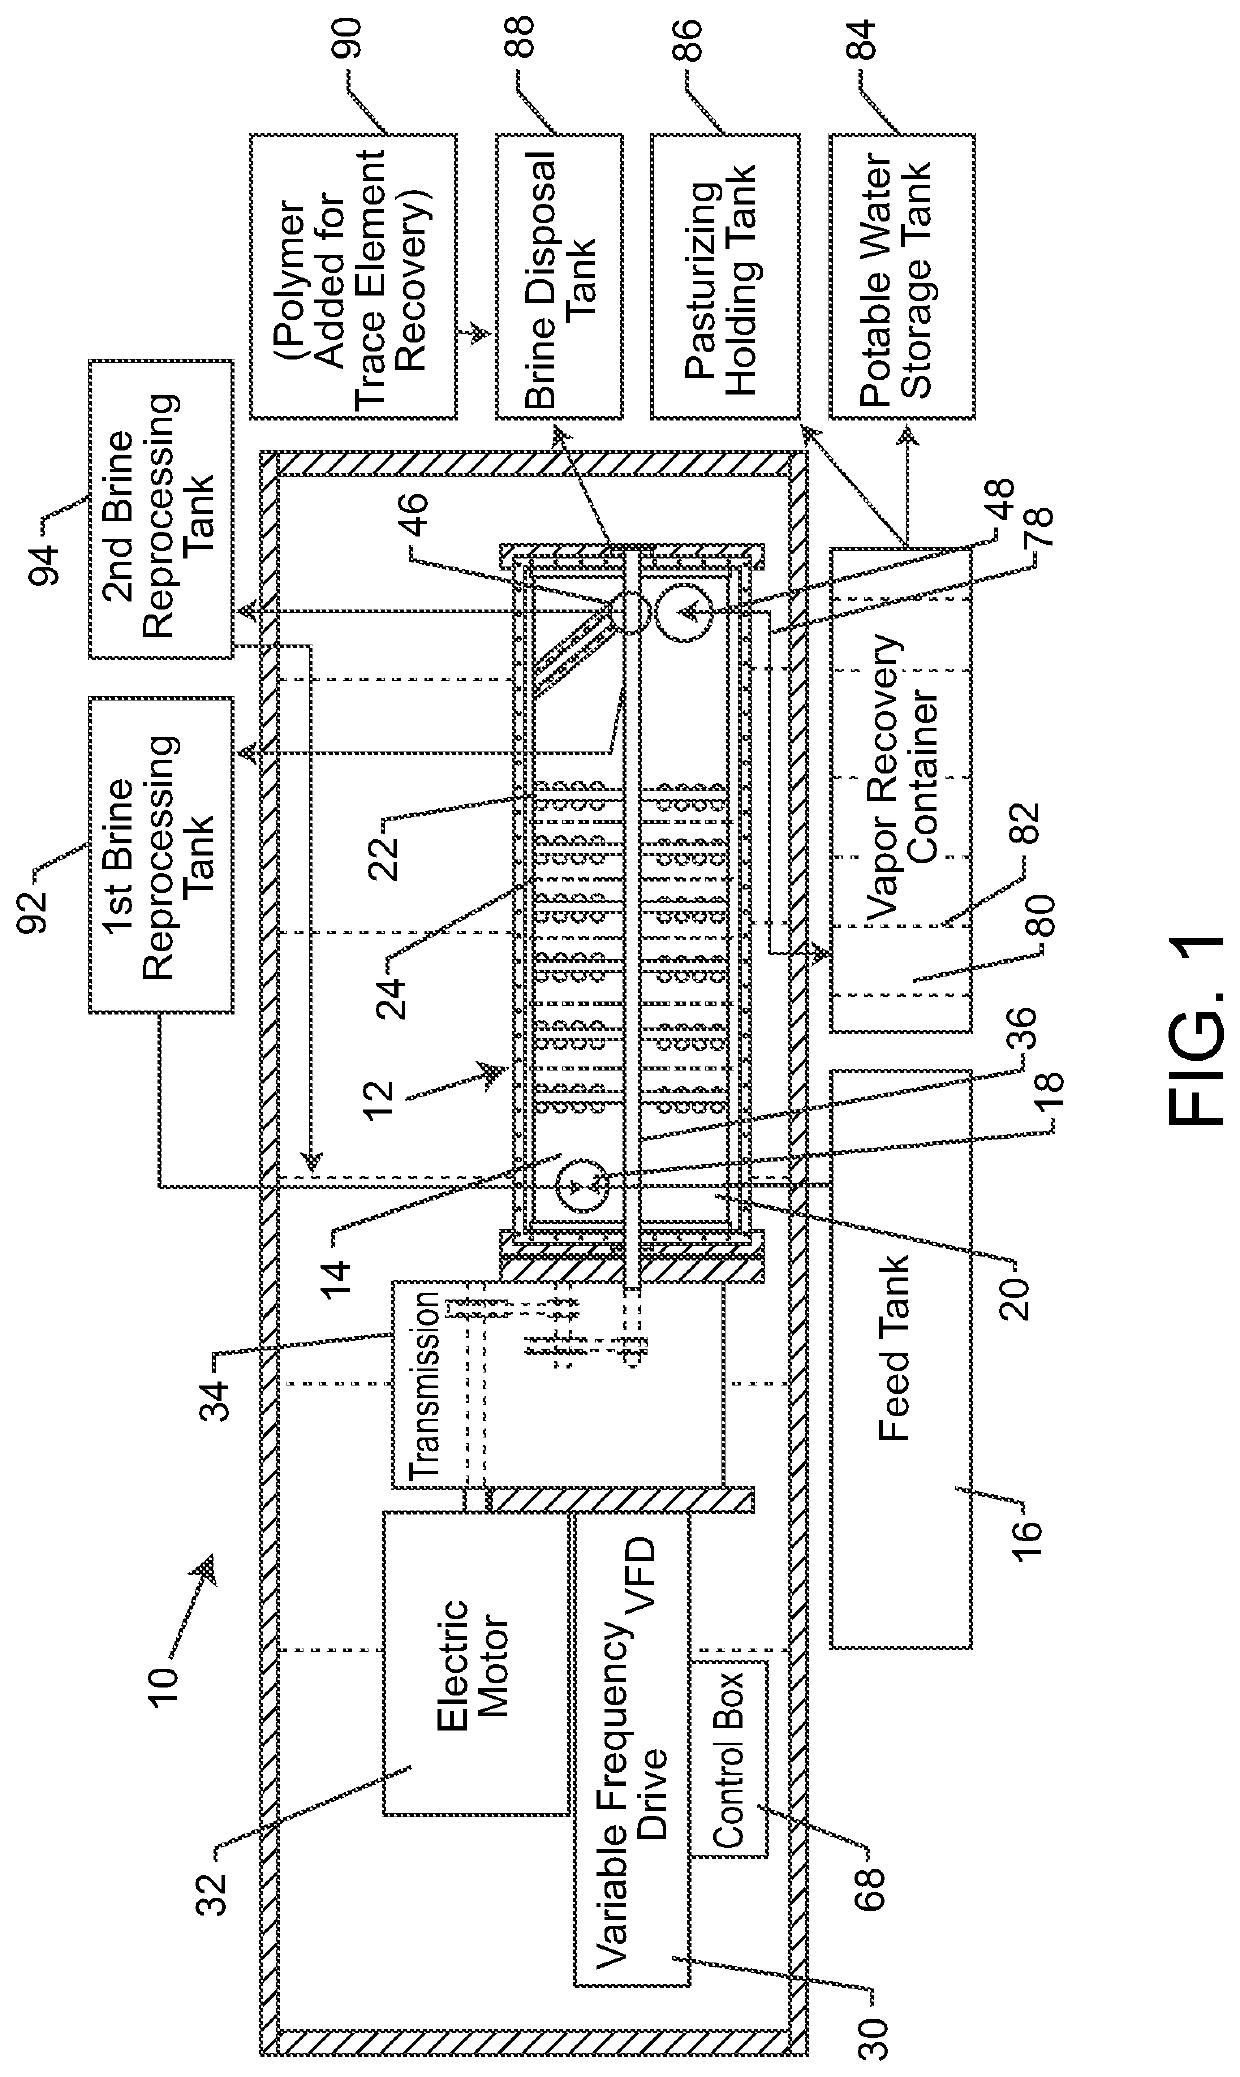 System for decontaminating water and generating water vapor